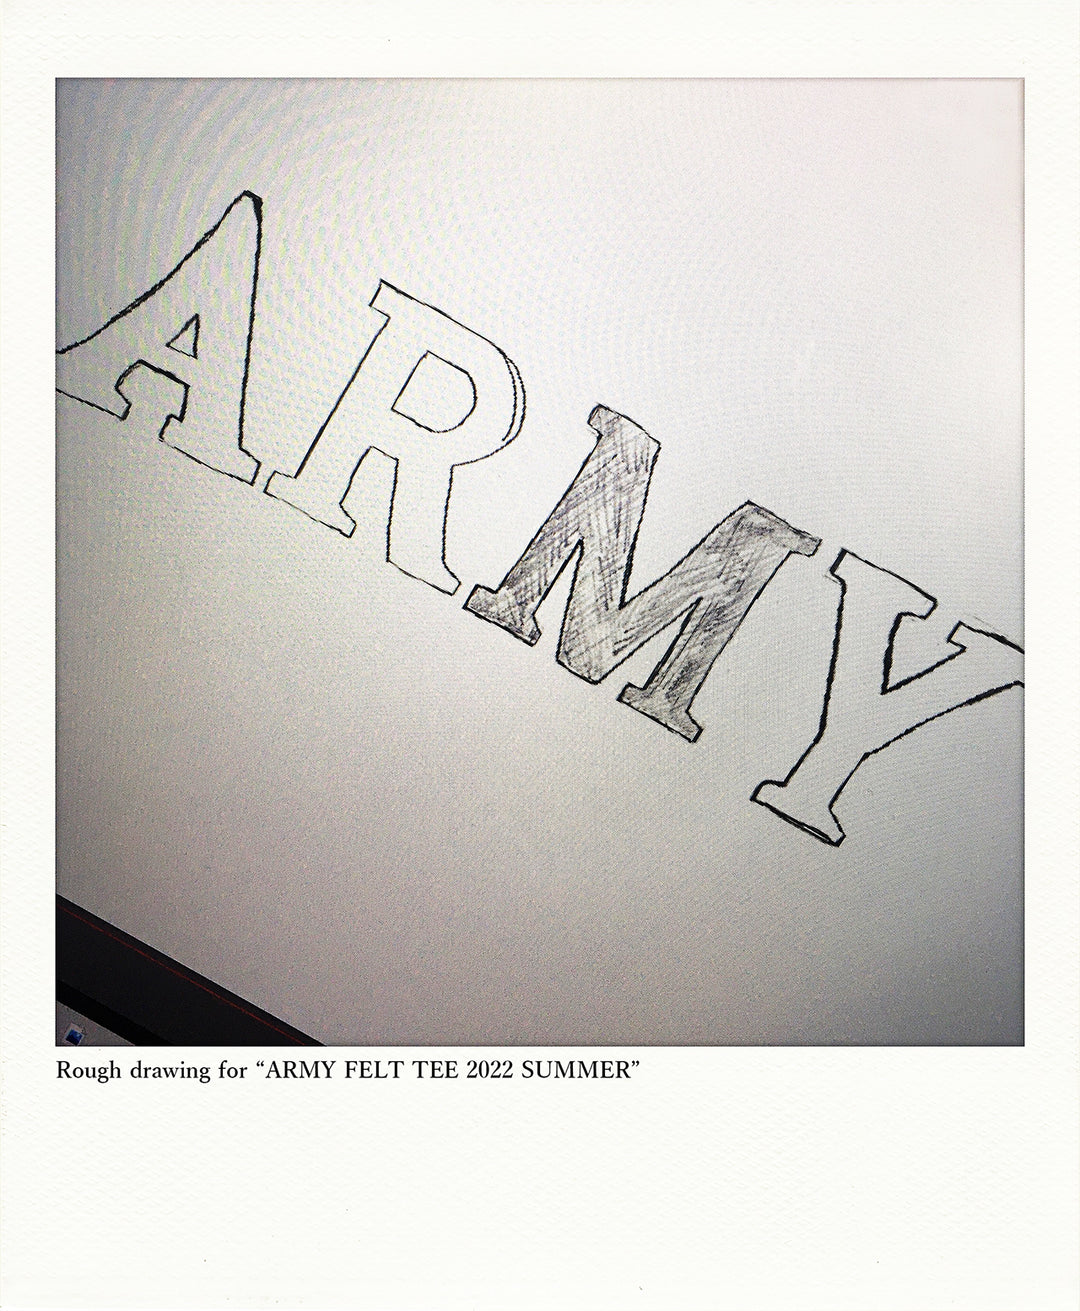 Rough drawing for "ARMY FELT TEE 2022 SUMMER"